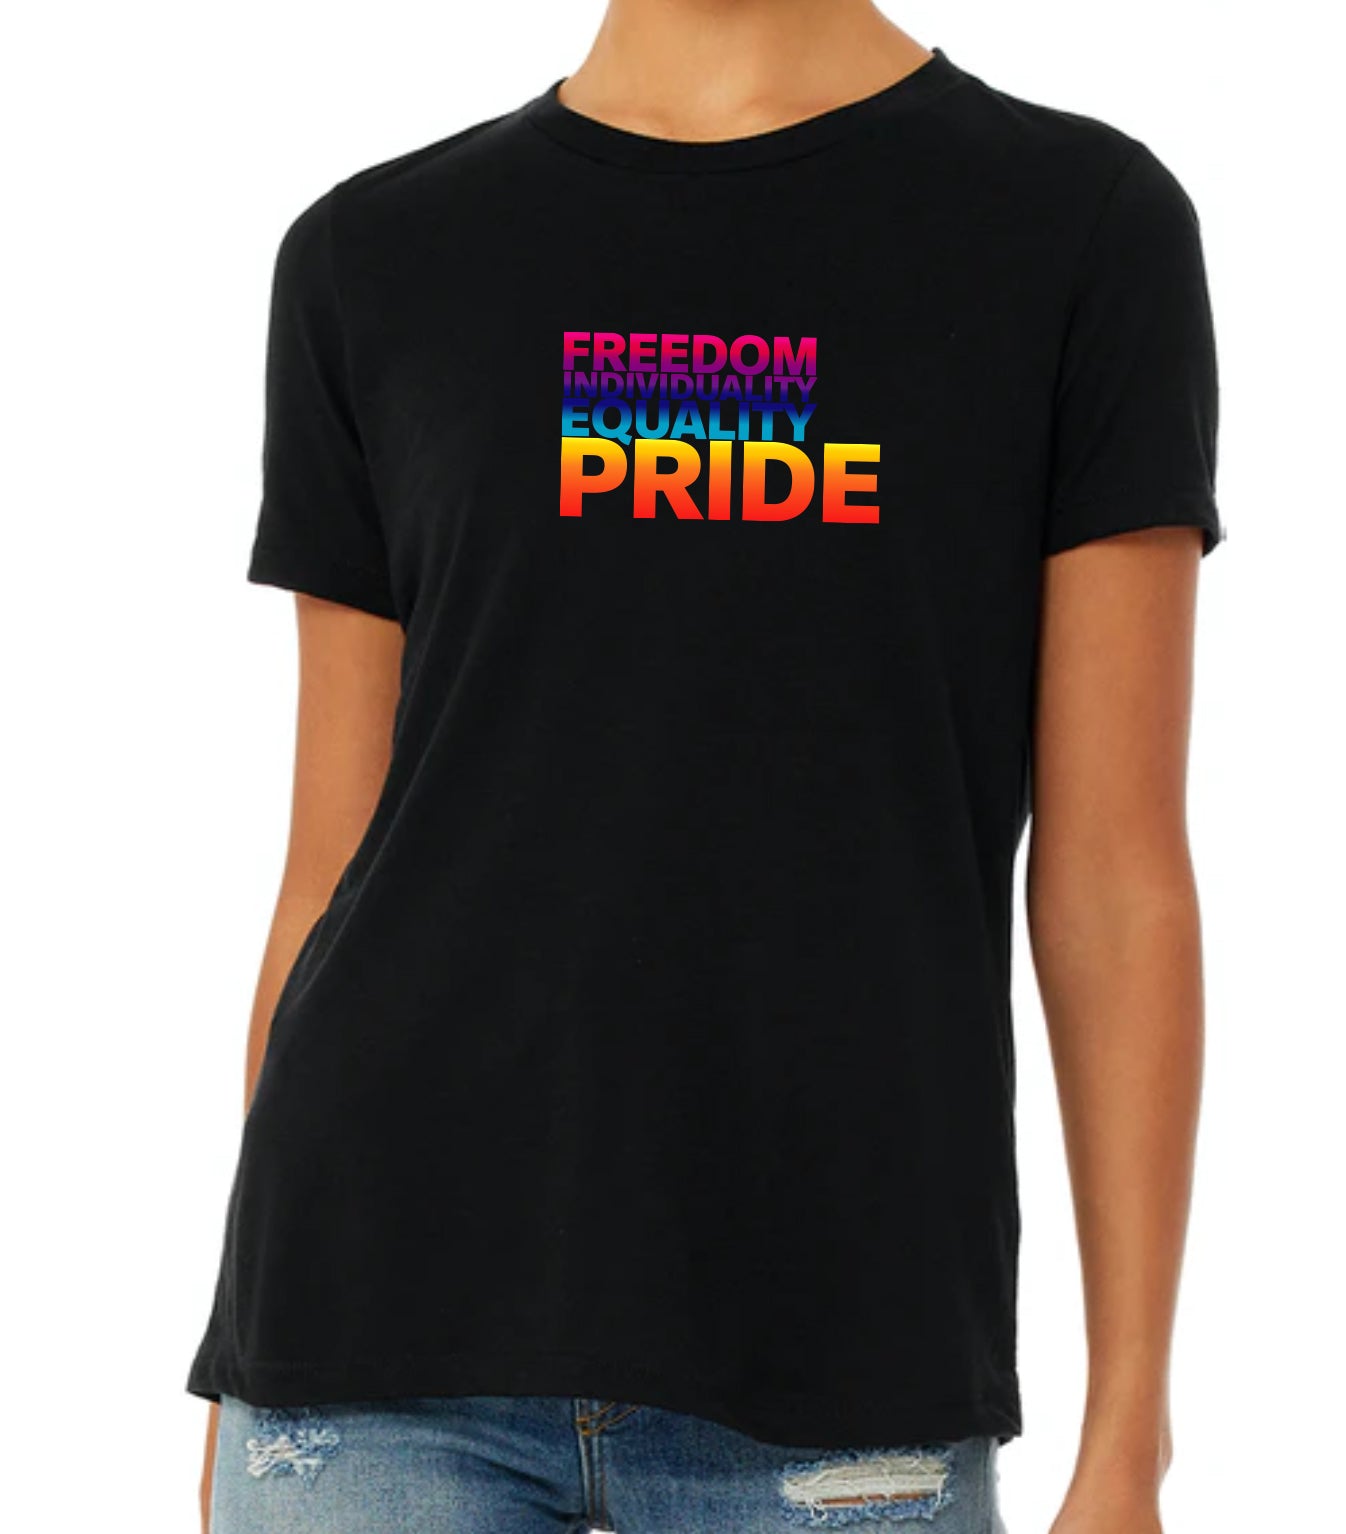 Freedom, Equality, Individuality, Pride Jewel Neck T-Shirt - Available in More Colors